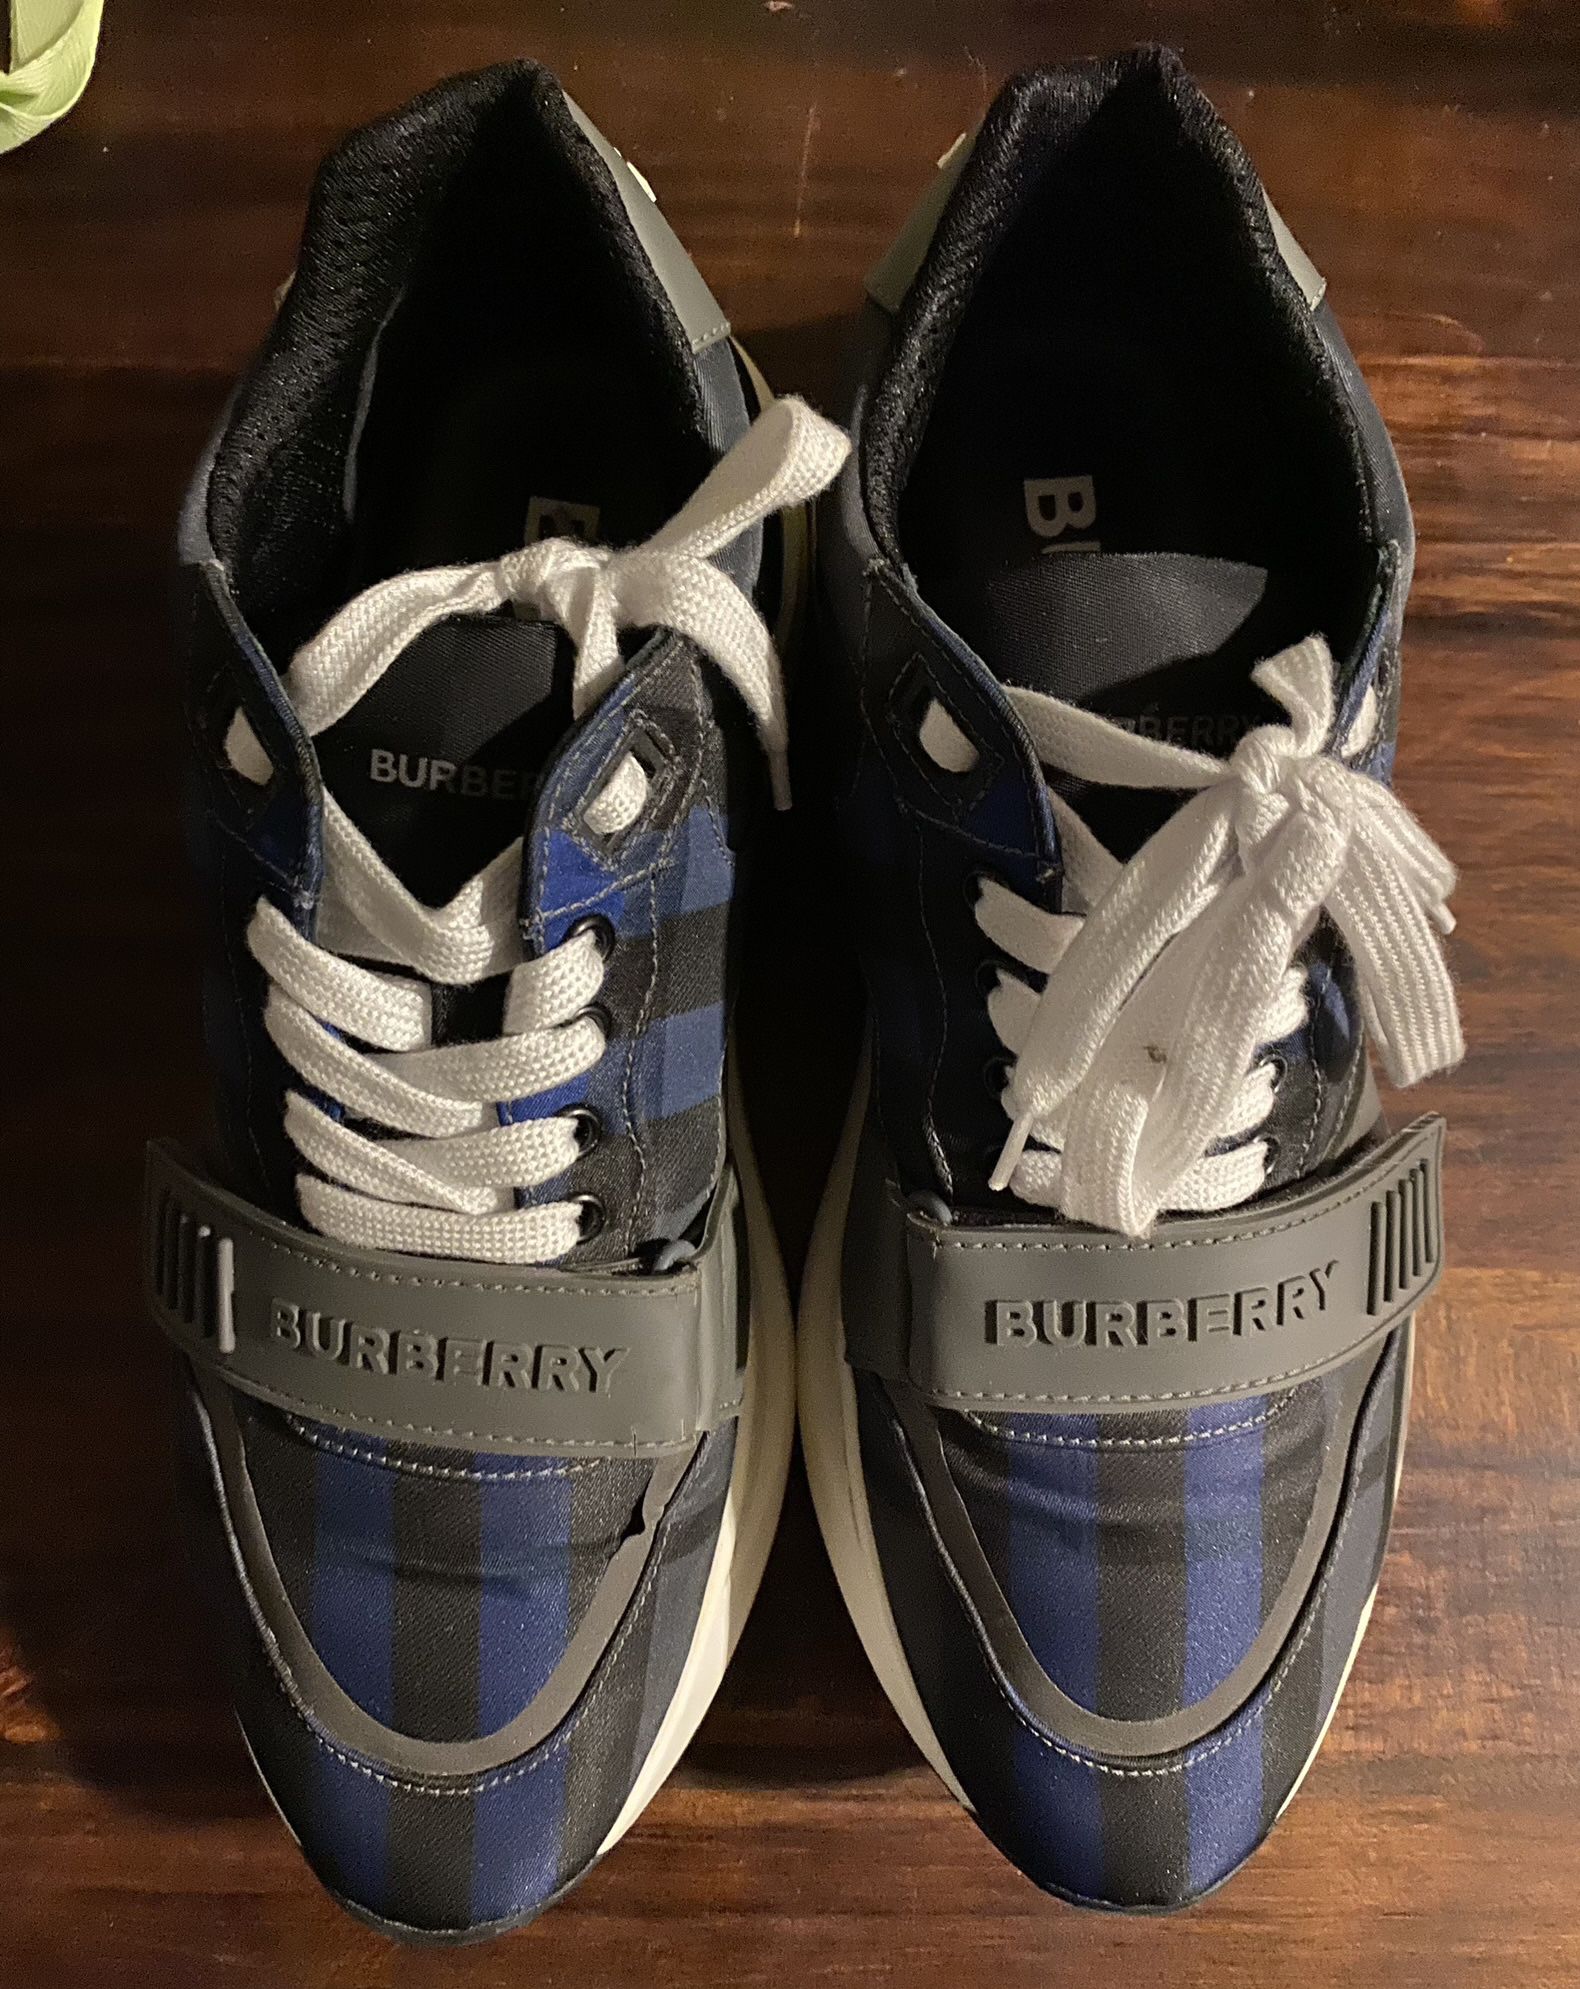 Burberry Ramsey Check Sneaker Navy- Size 9